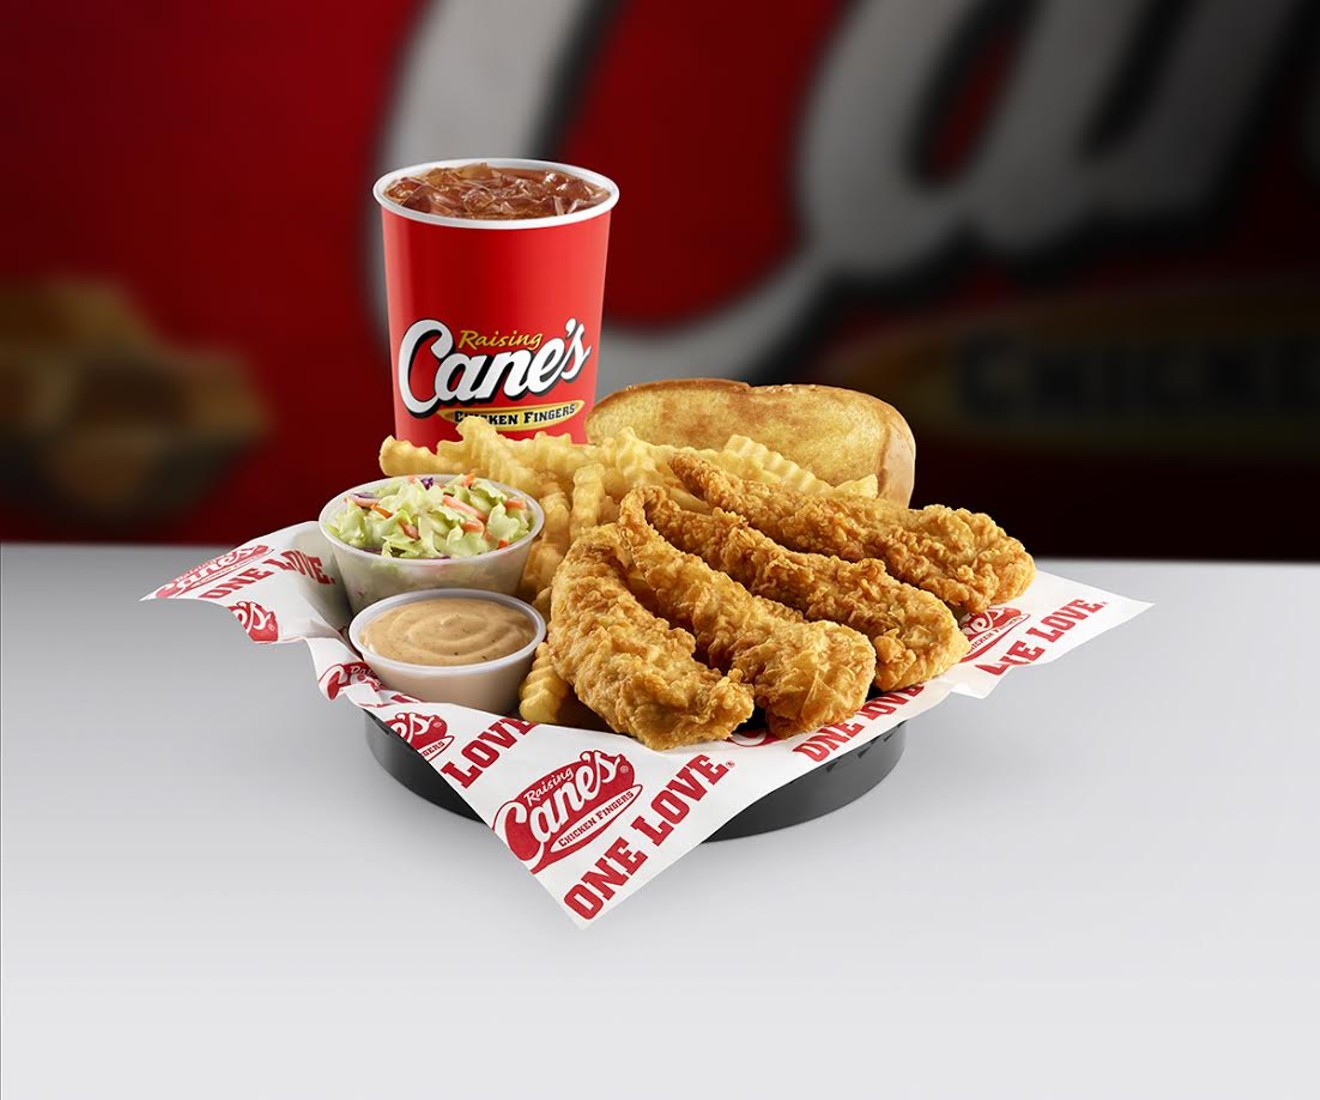 These chicken fingers could be in your mouth, if you make it to the grand opening of metro Denver's first Raising Cane's.